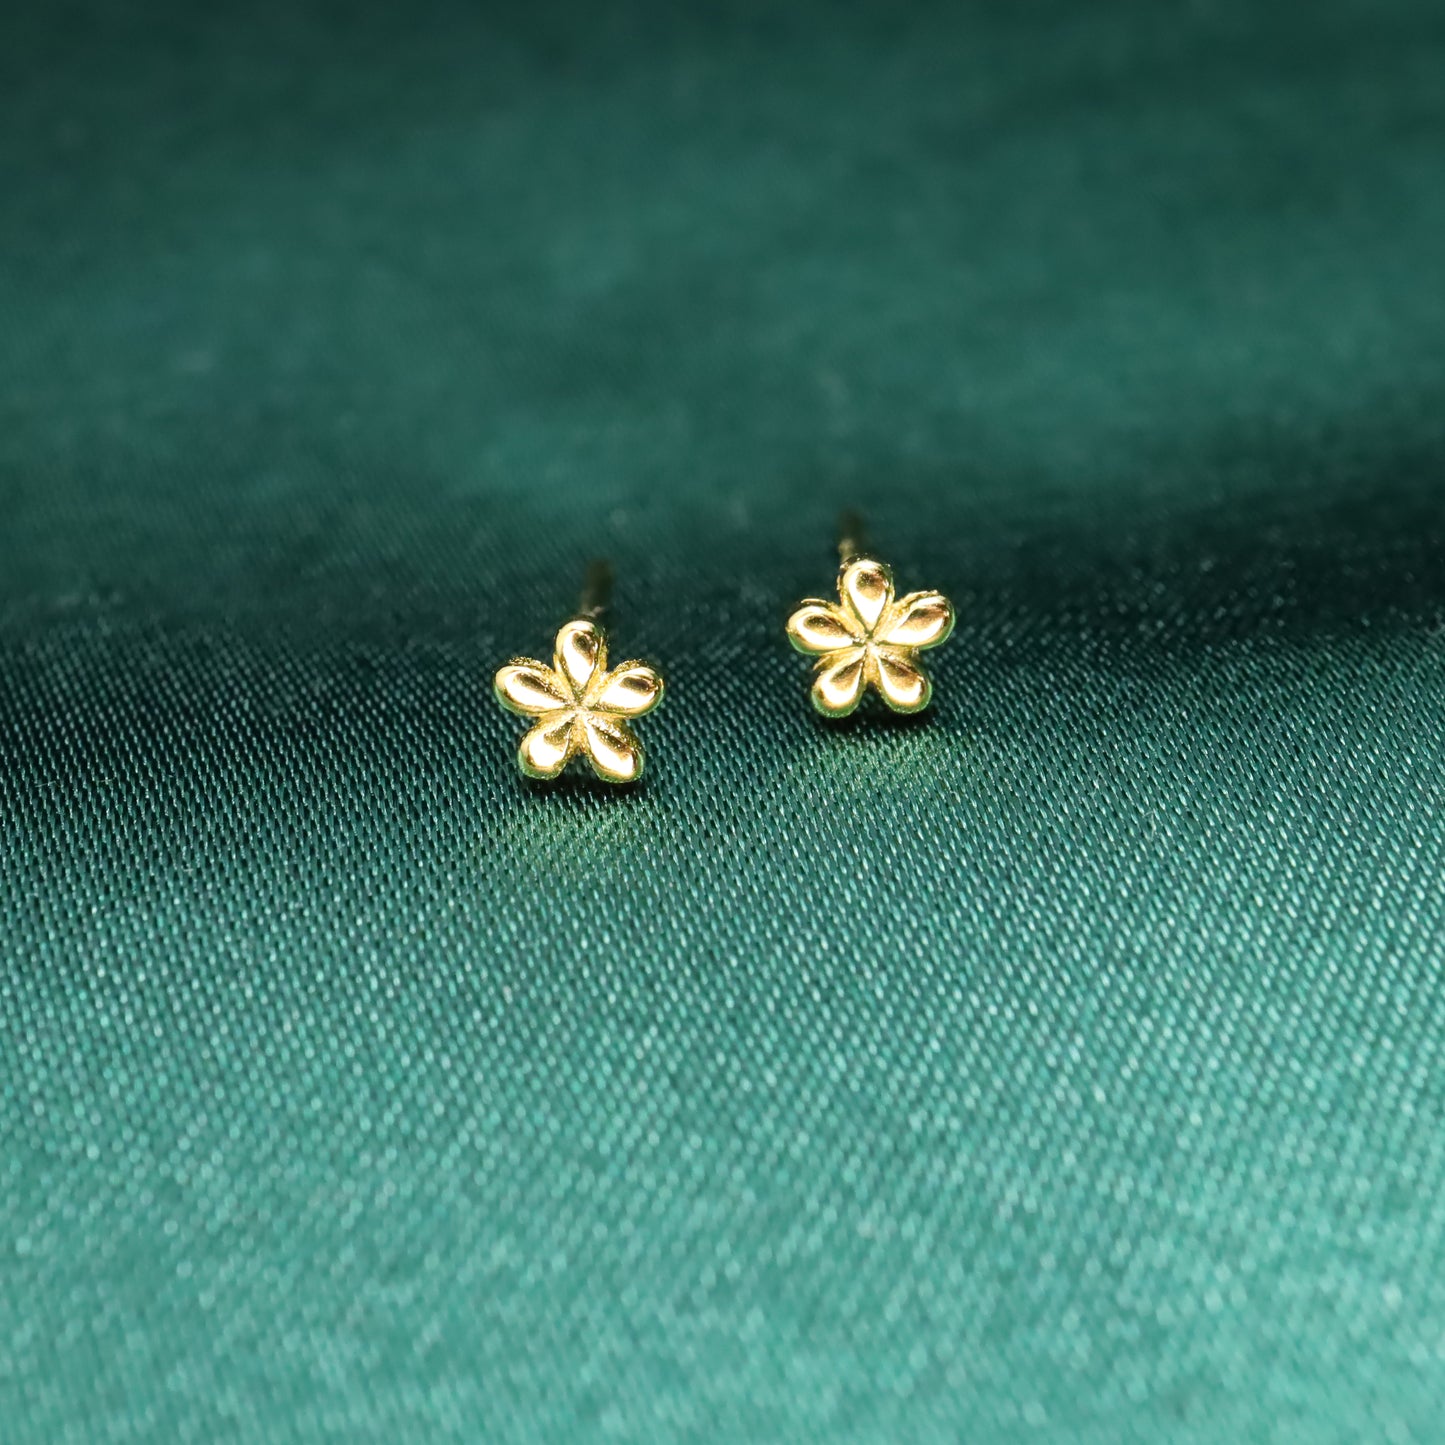 Mini Flower - S925 Sterling Silver Stud Earrings (Silver & Gold 2 Pairs)